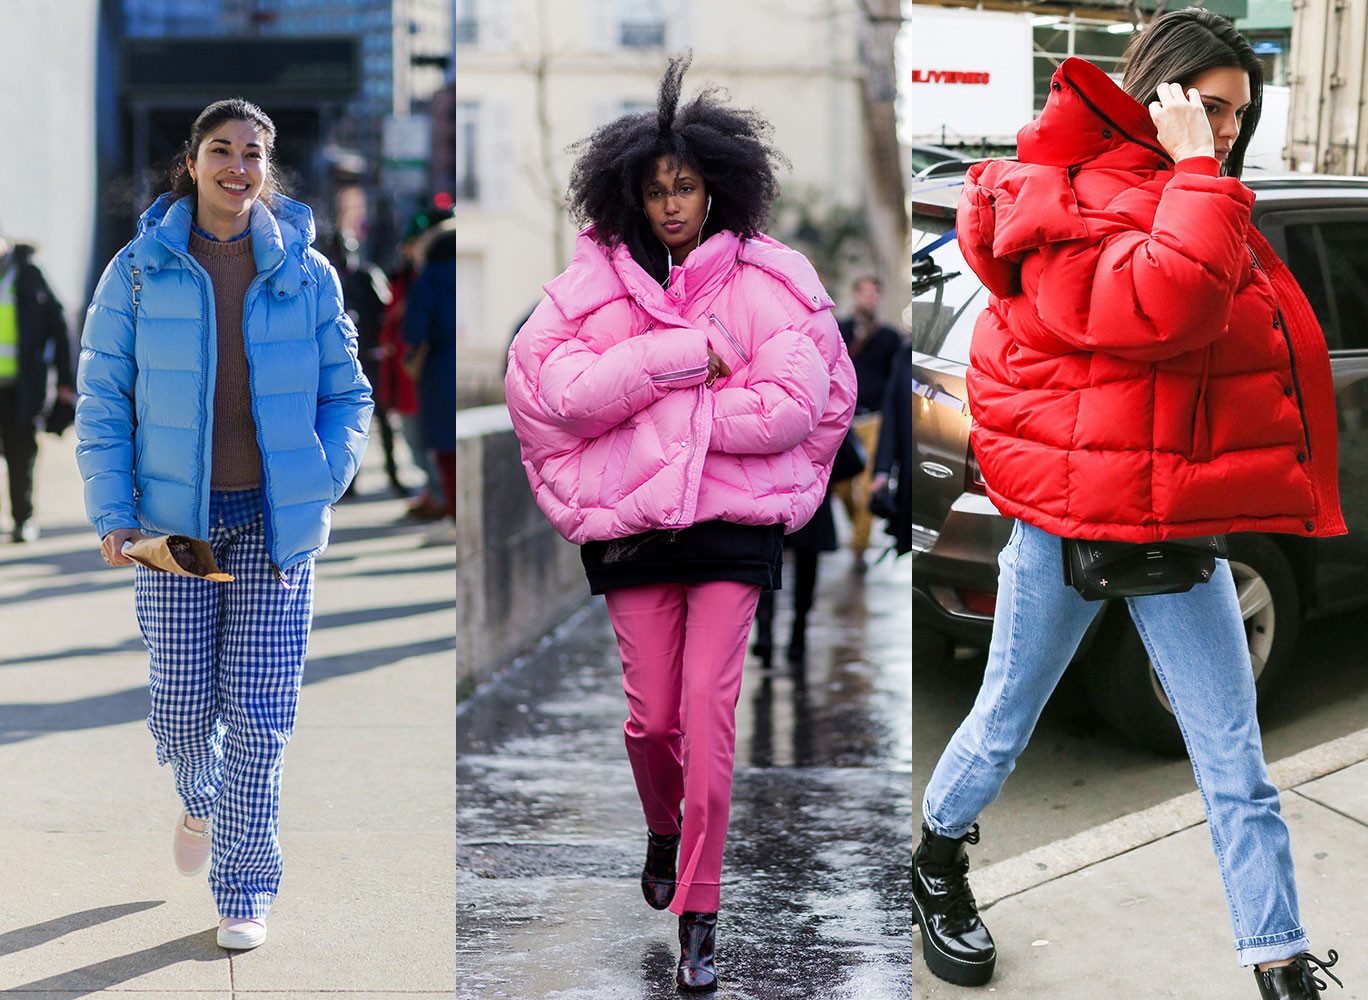 Oversized Puffer Coats for 2018 Street Fashion | Melody Jacob